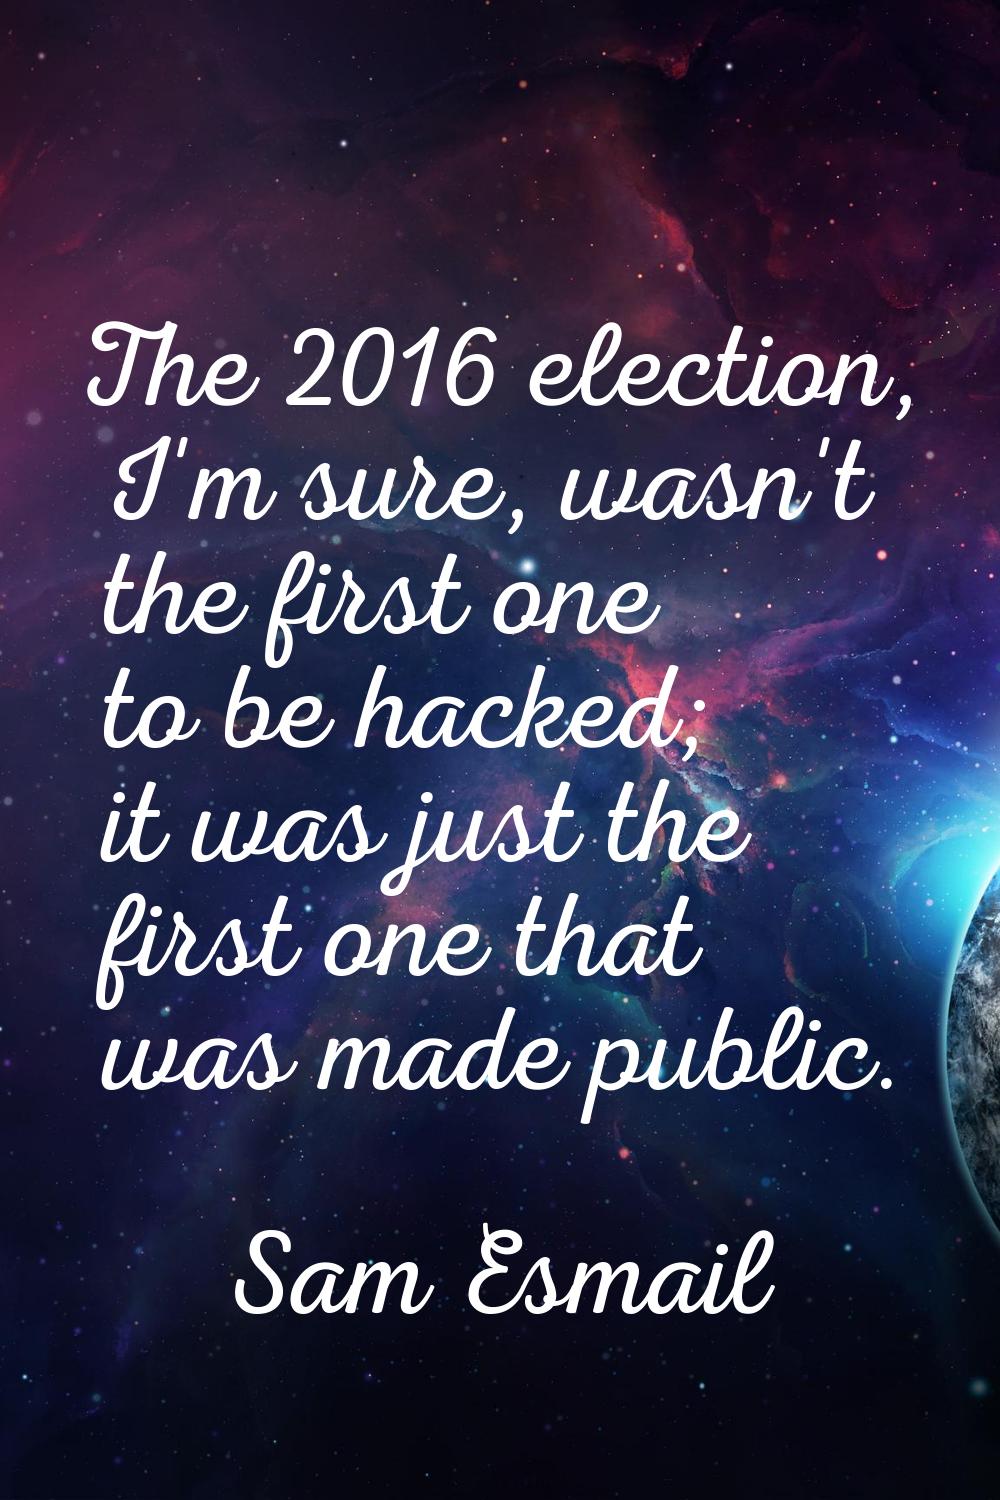 The 2016 election, I'm sure, wasn't the first one to be hacked; it was just the first one that was 